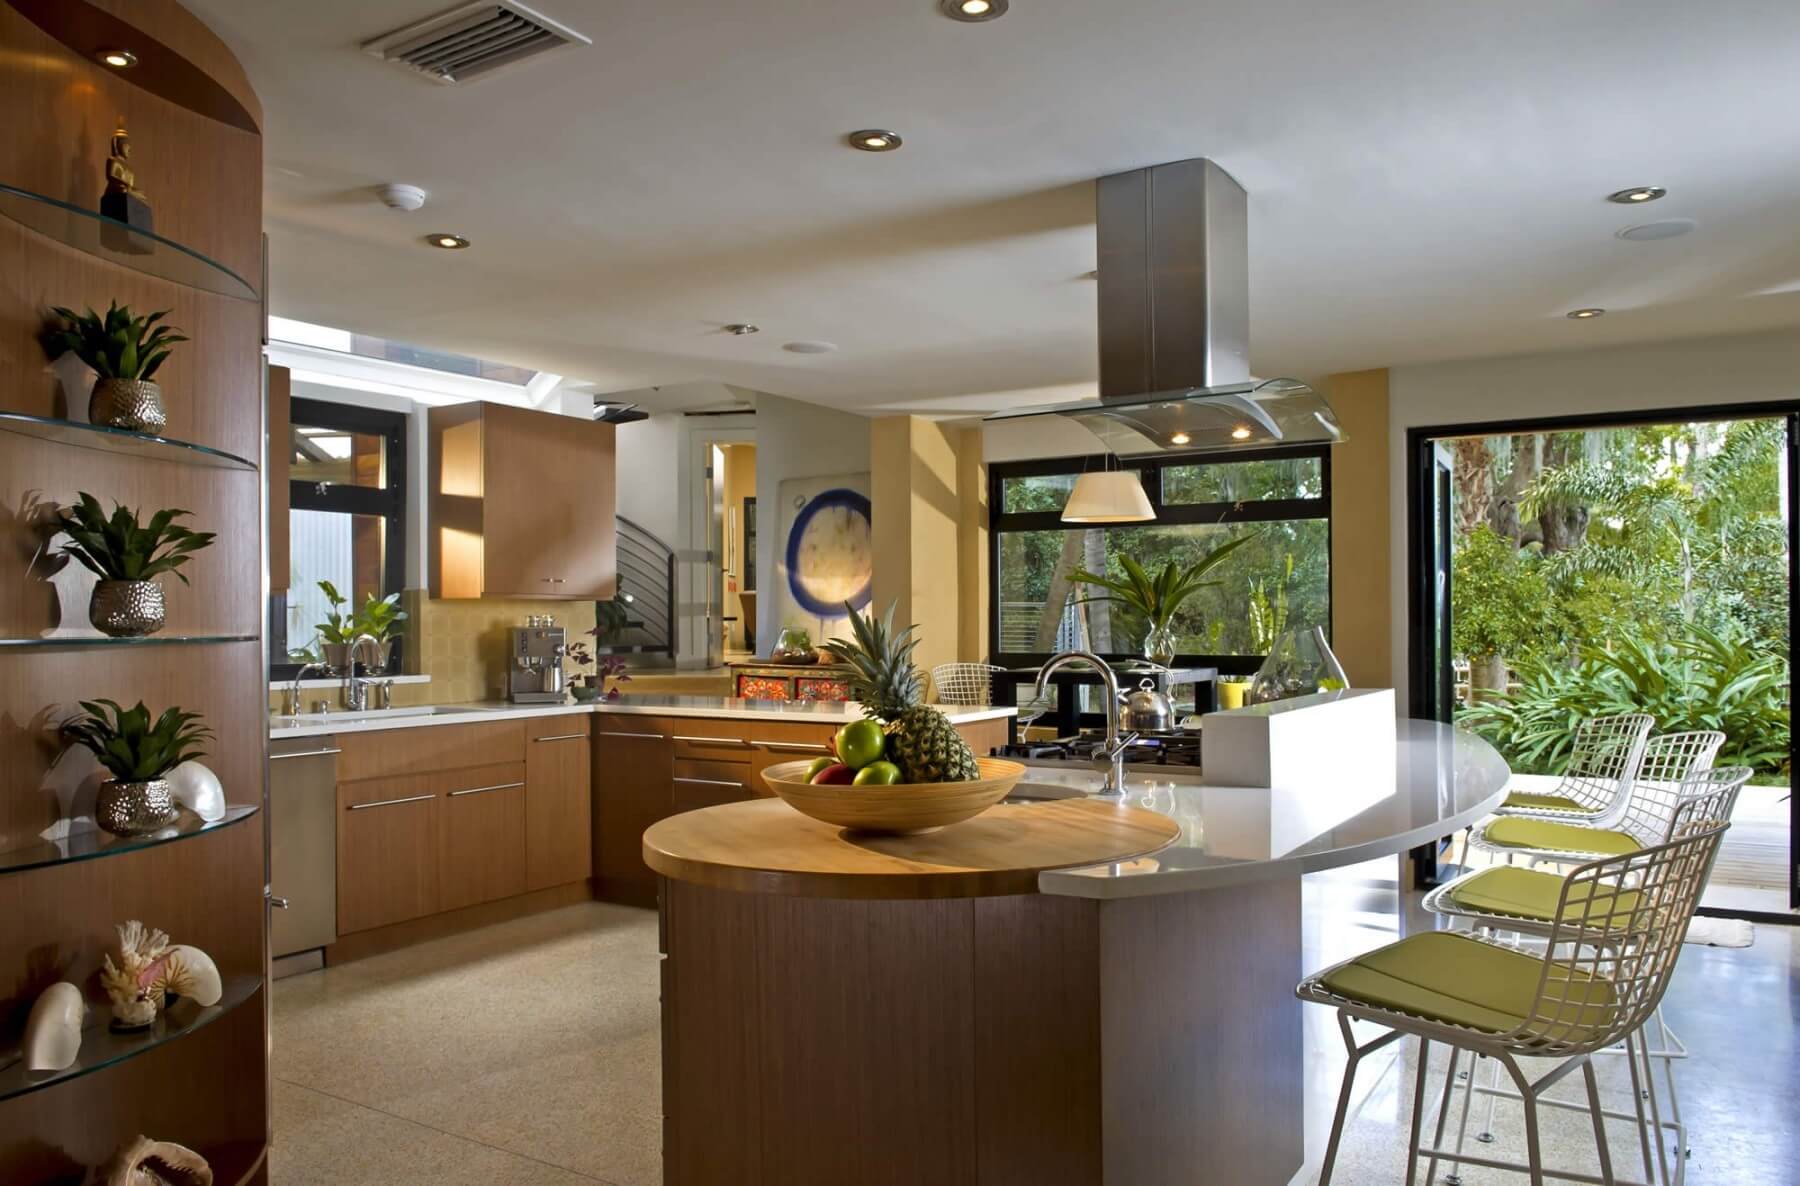 The Modern Tropical Kitchen Designs Will Make Your Day